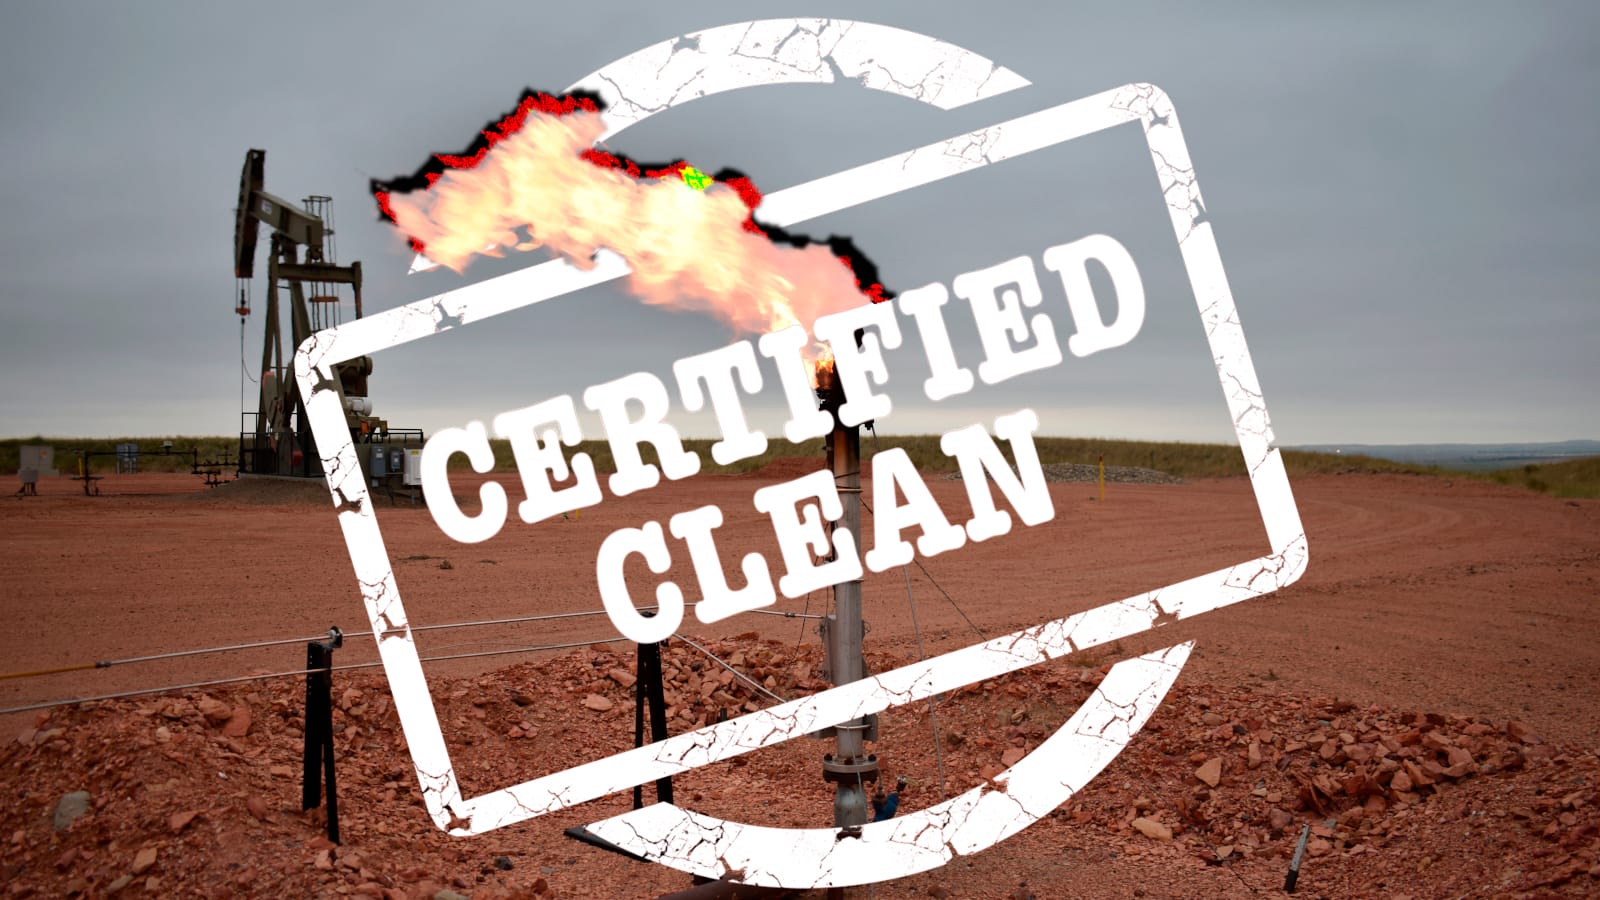 A photo of a flare burns excess methane, or natural gas, from crude oil production, overlaid with a “certified clean” logo.